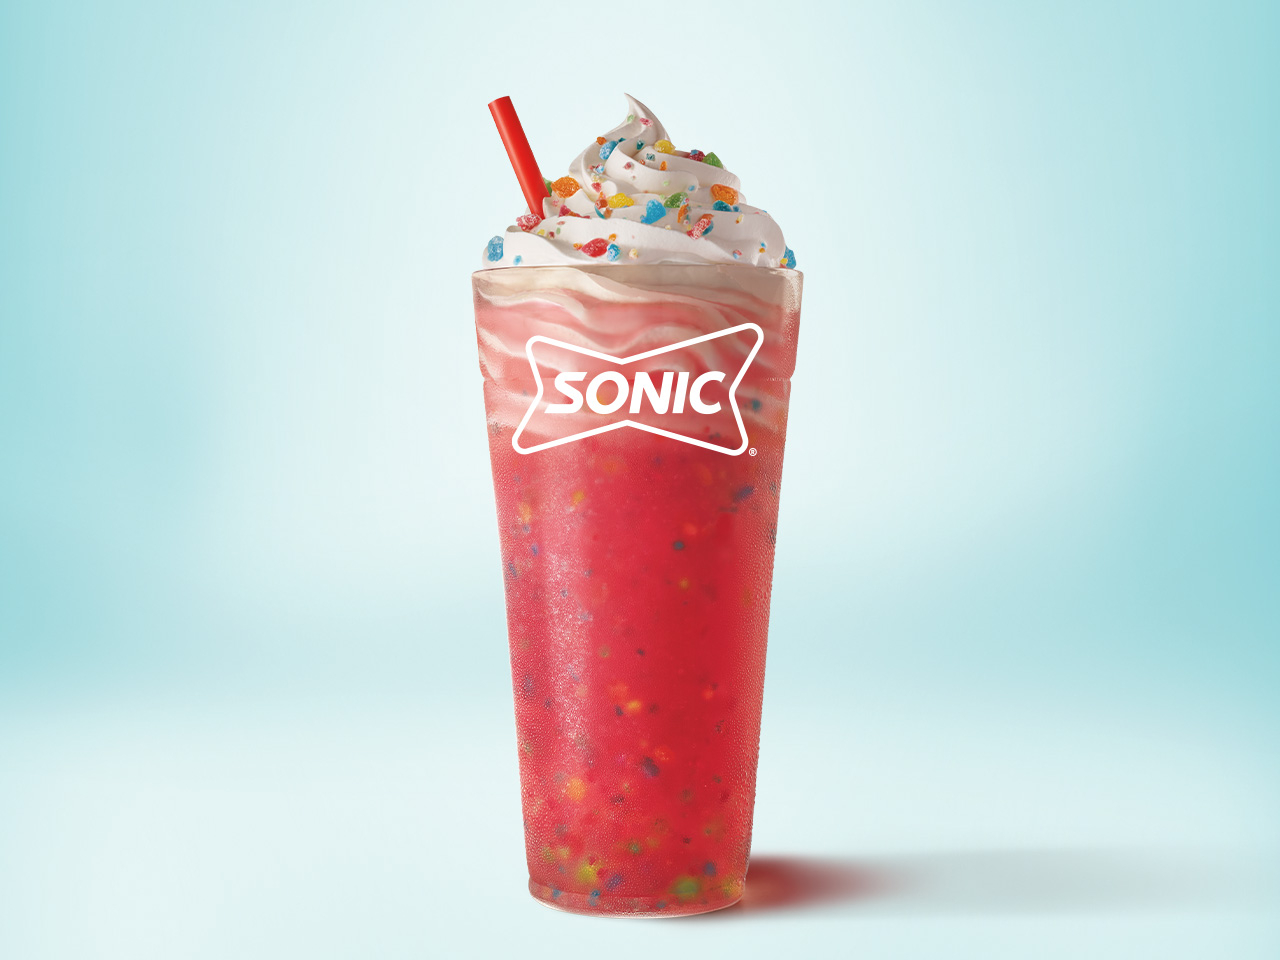 Sonic's New Summer Slush Flavor Offers A Sweet And Sour Sip